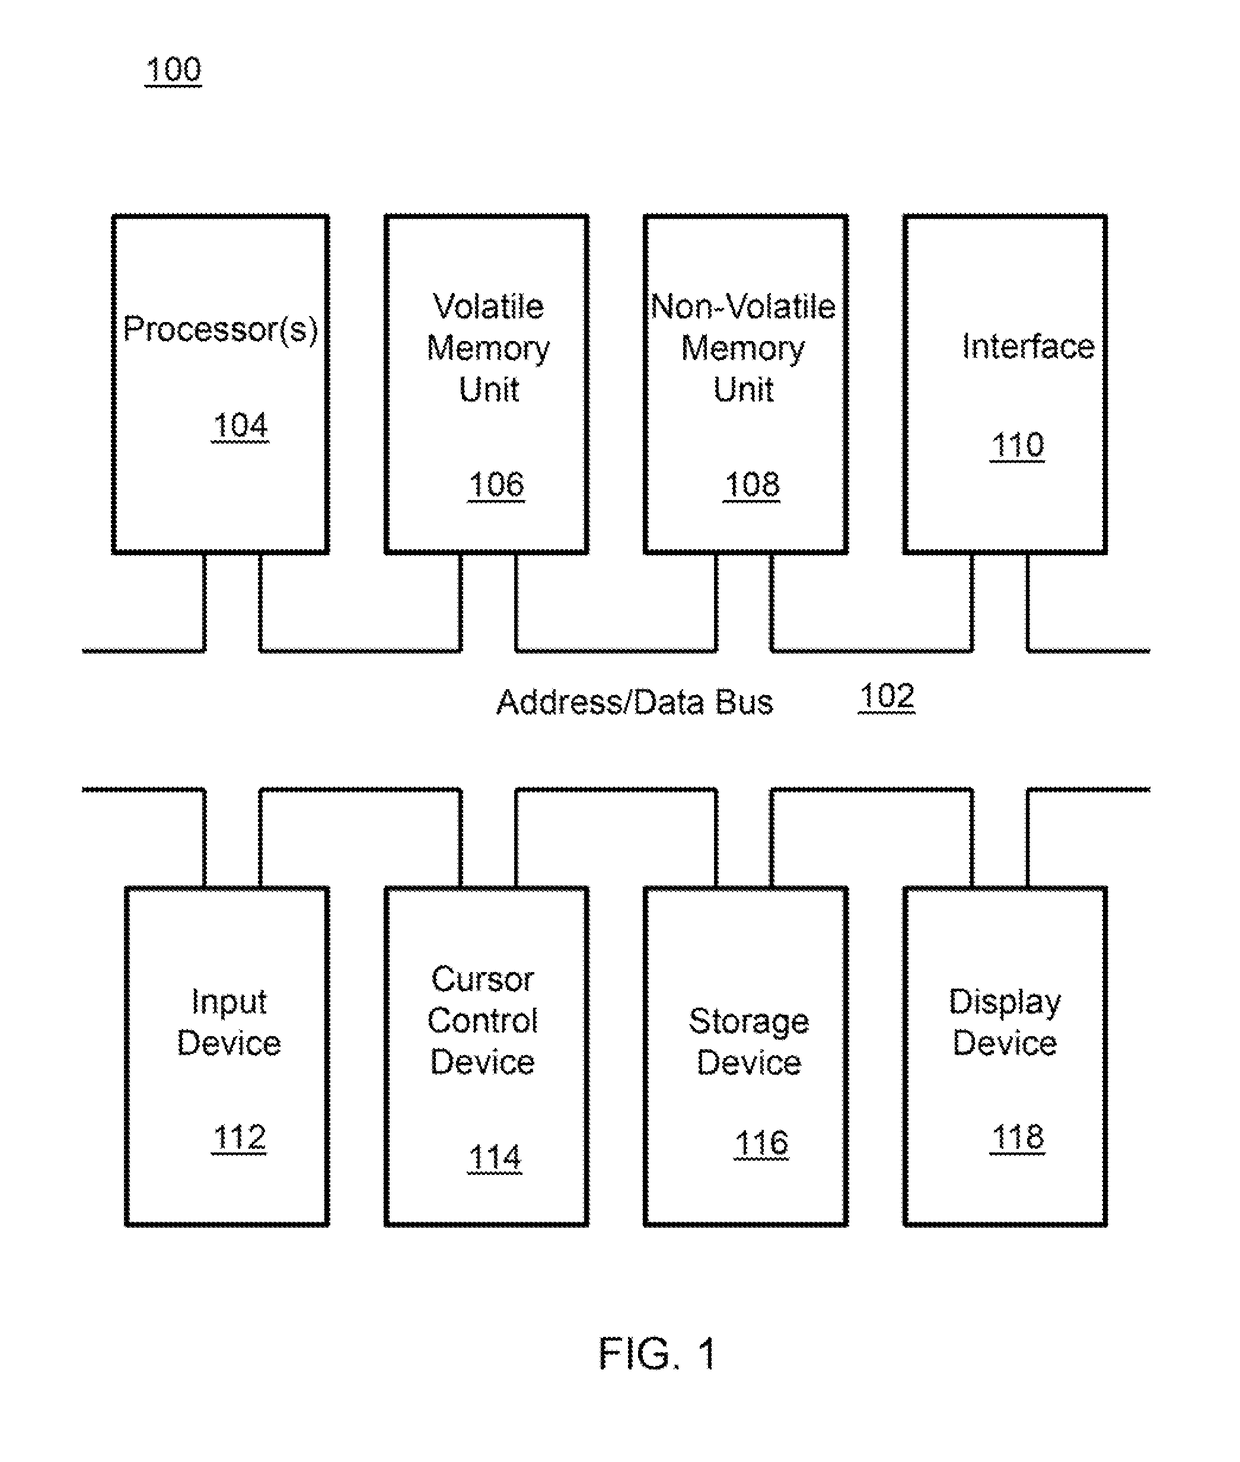 System and method for cloud control operations plane based on proactive security algorithms